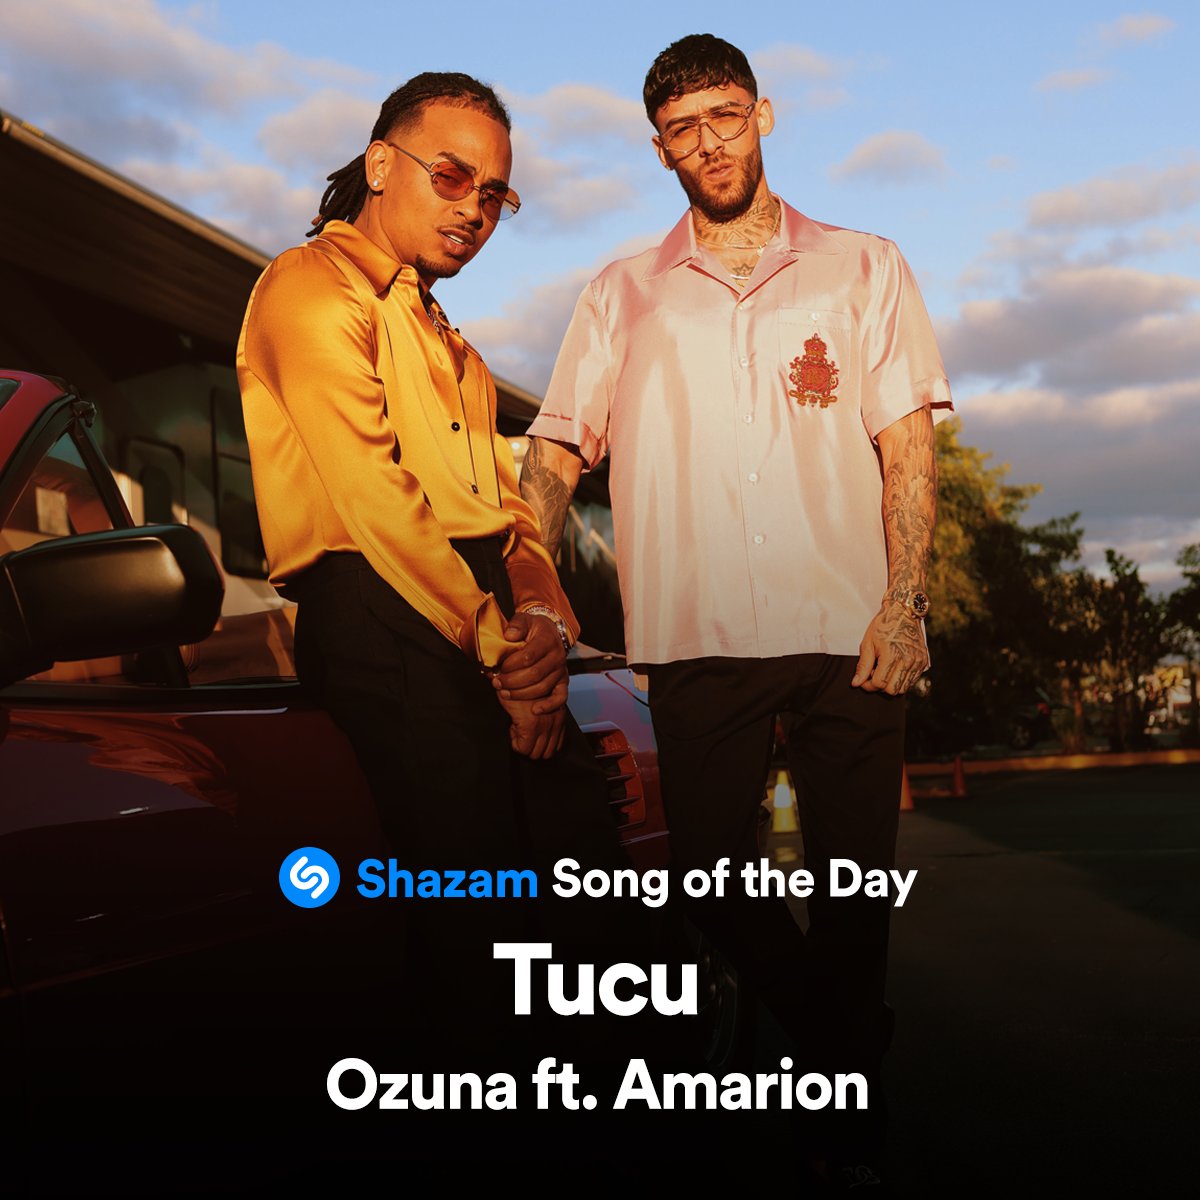 #Tucu by @ozuna ft. #Amarion is our Song of the Day!! Listen now on @AppleMusic: apple.co/Tucu 🎉